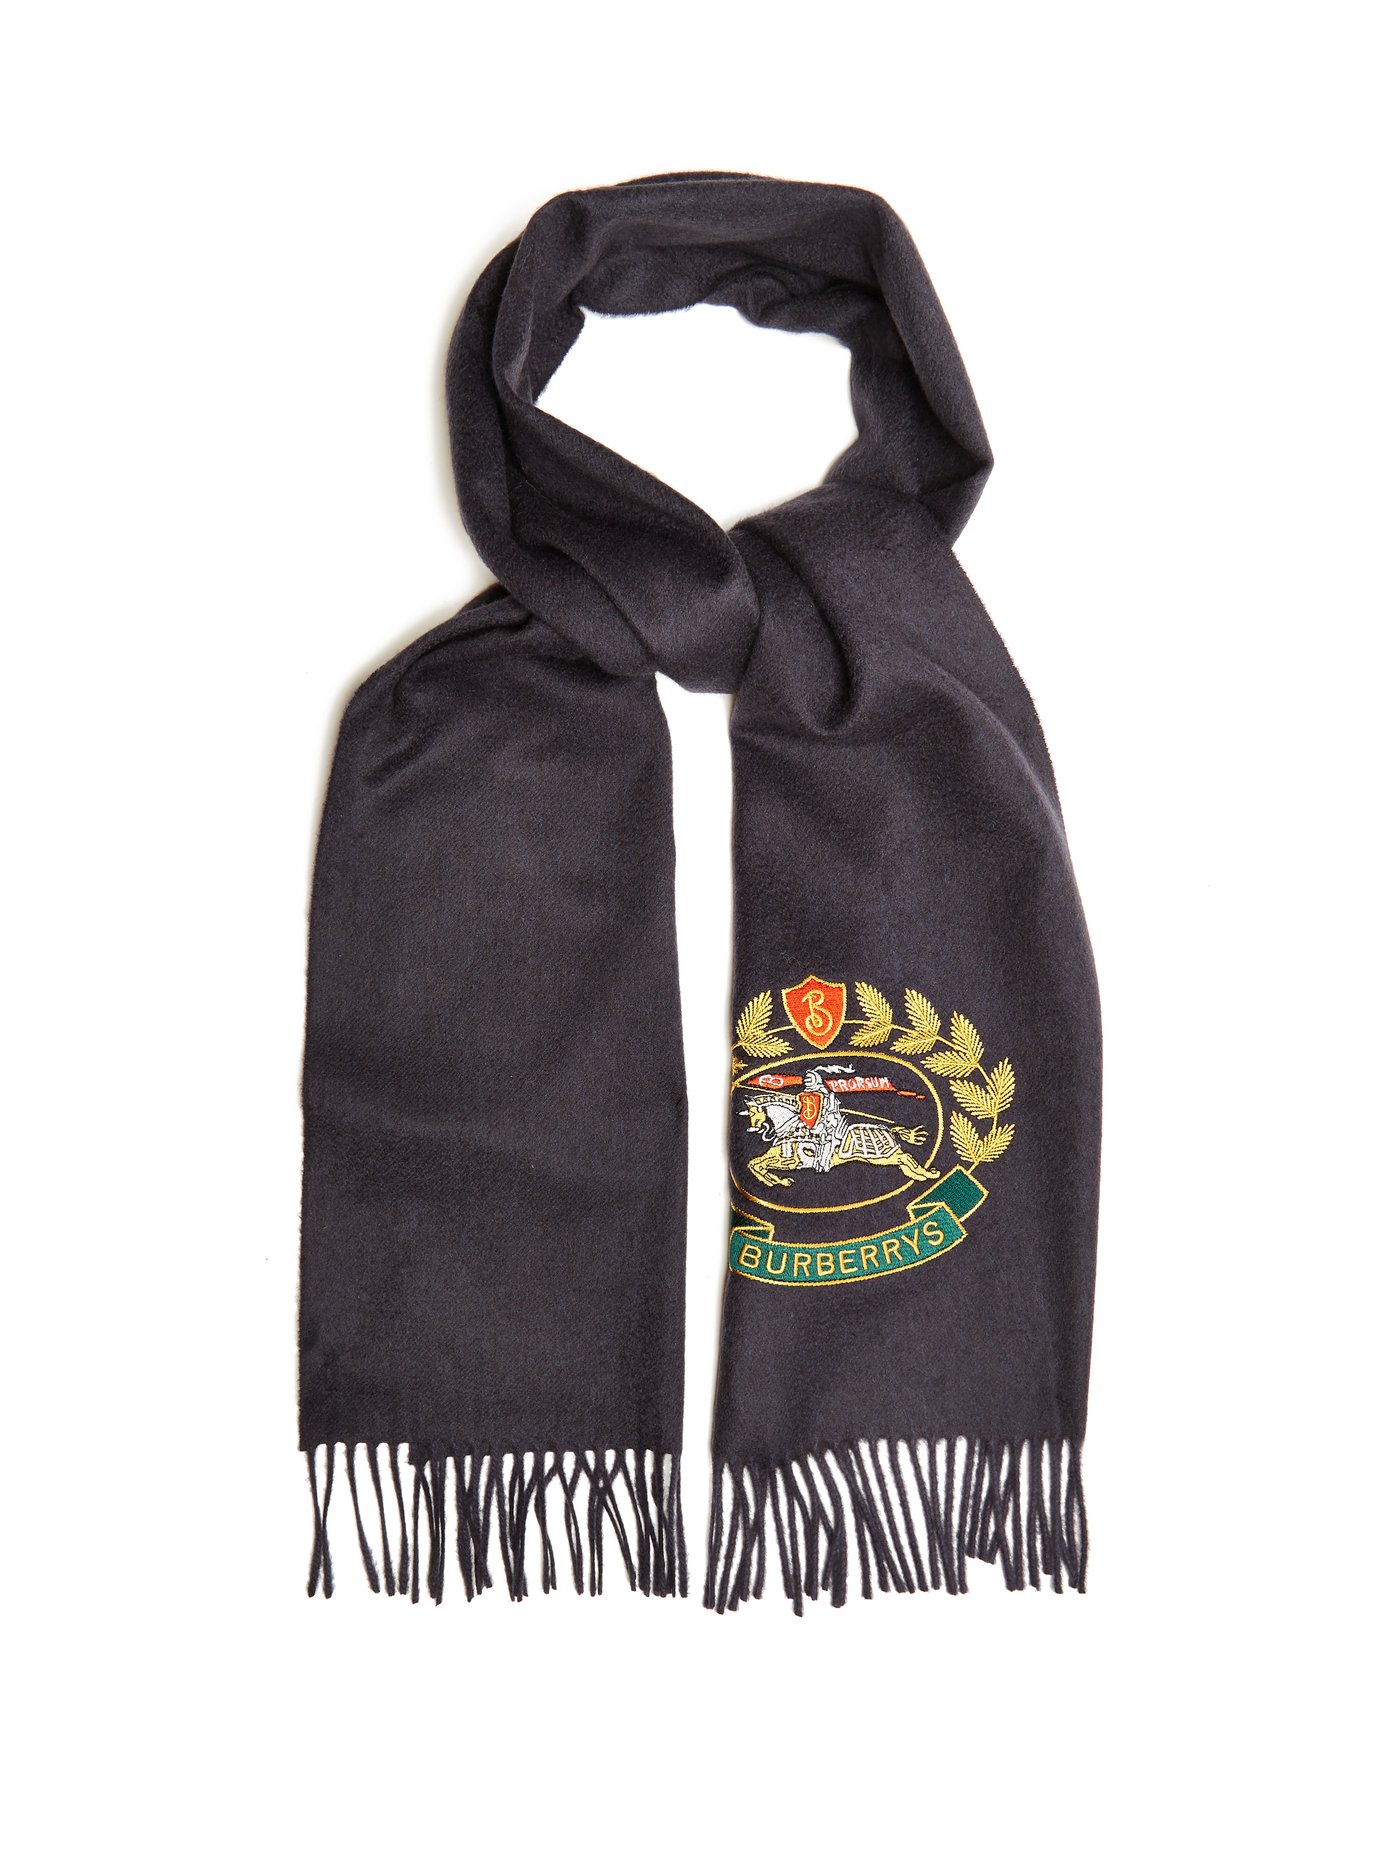 burberry scarf embroidered